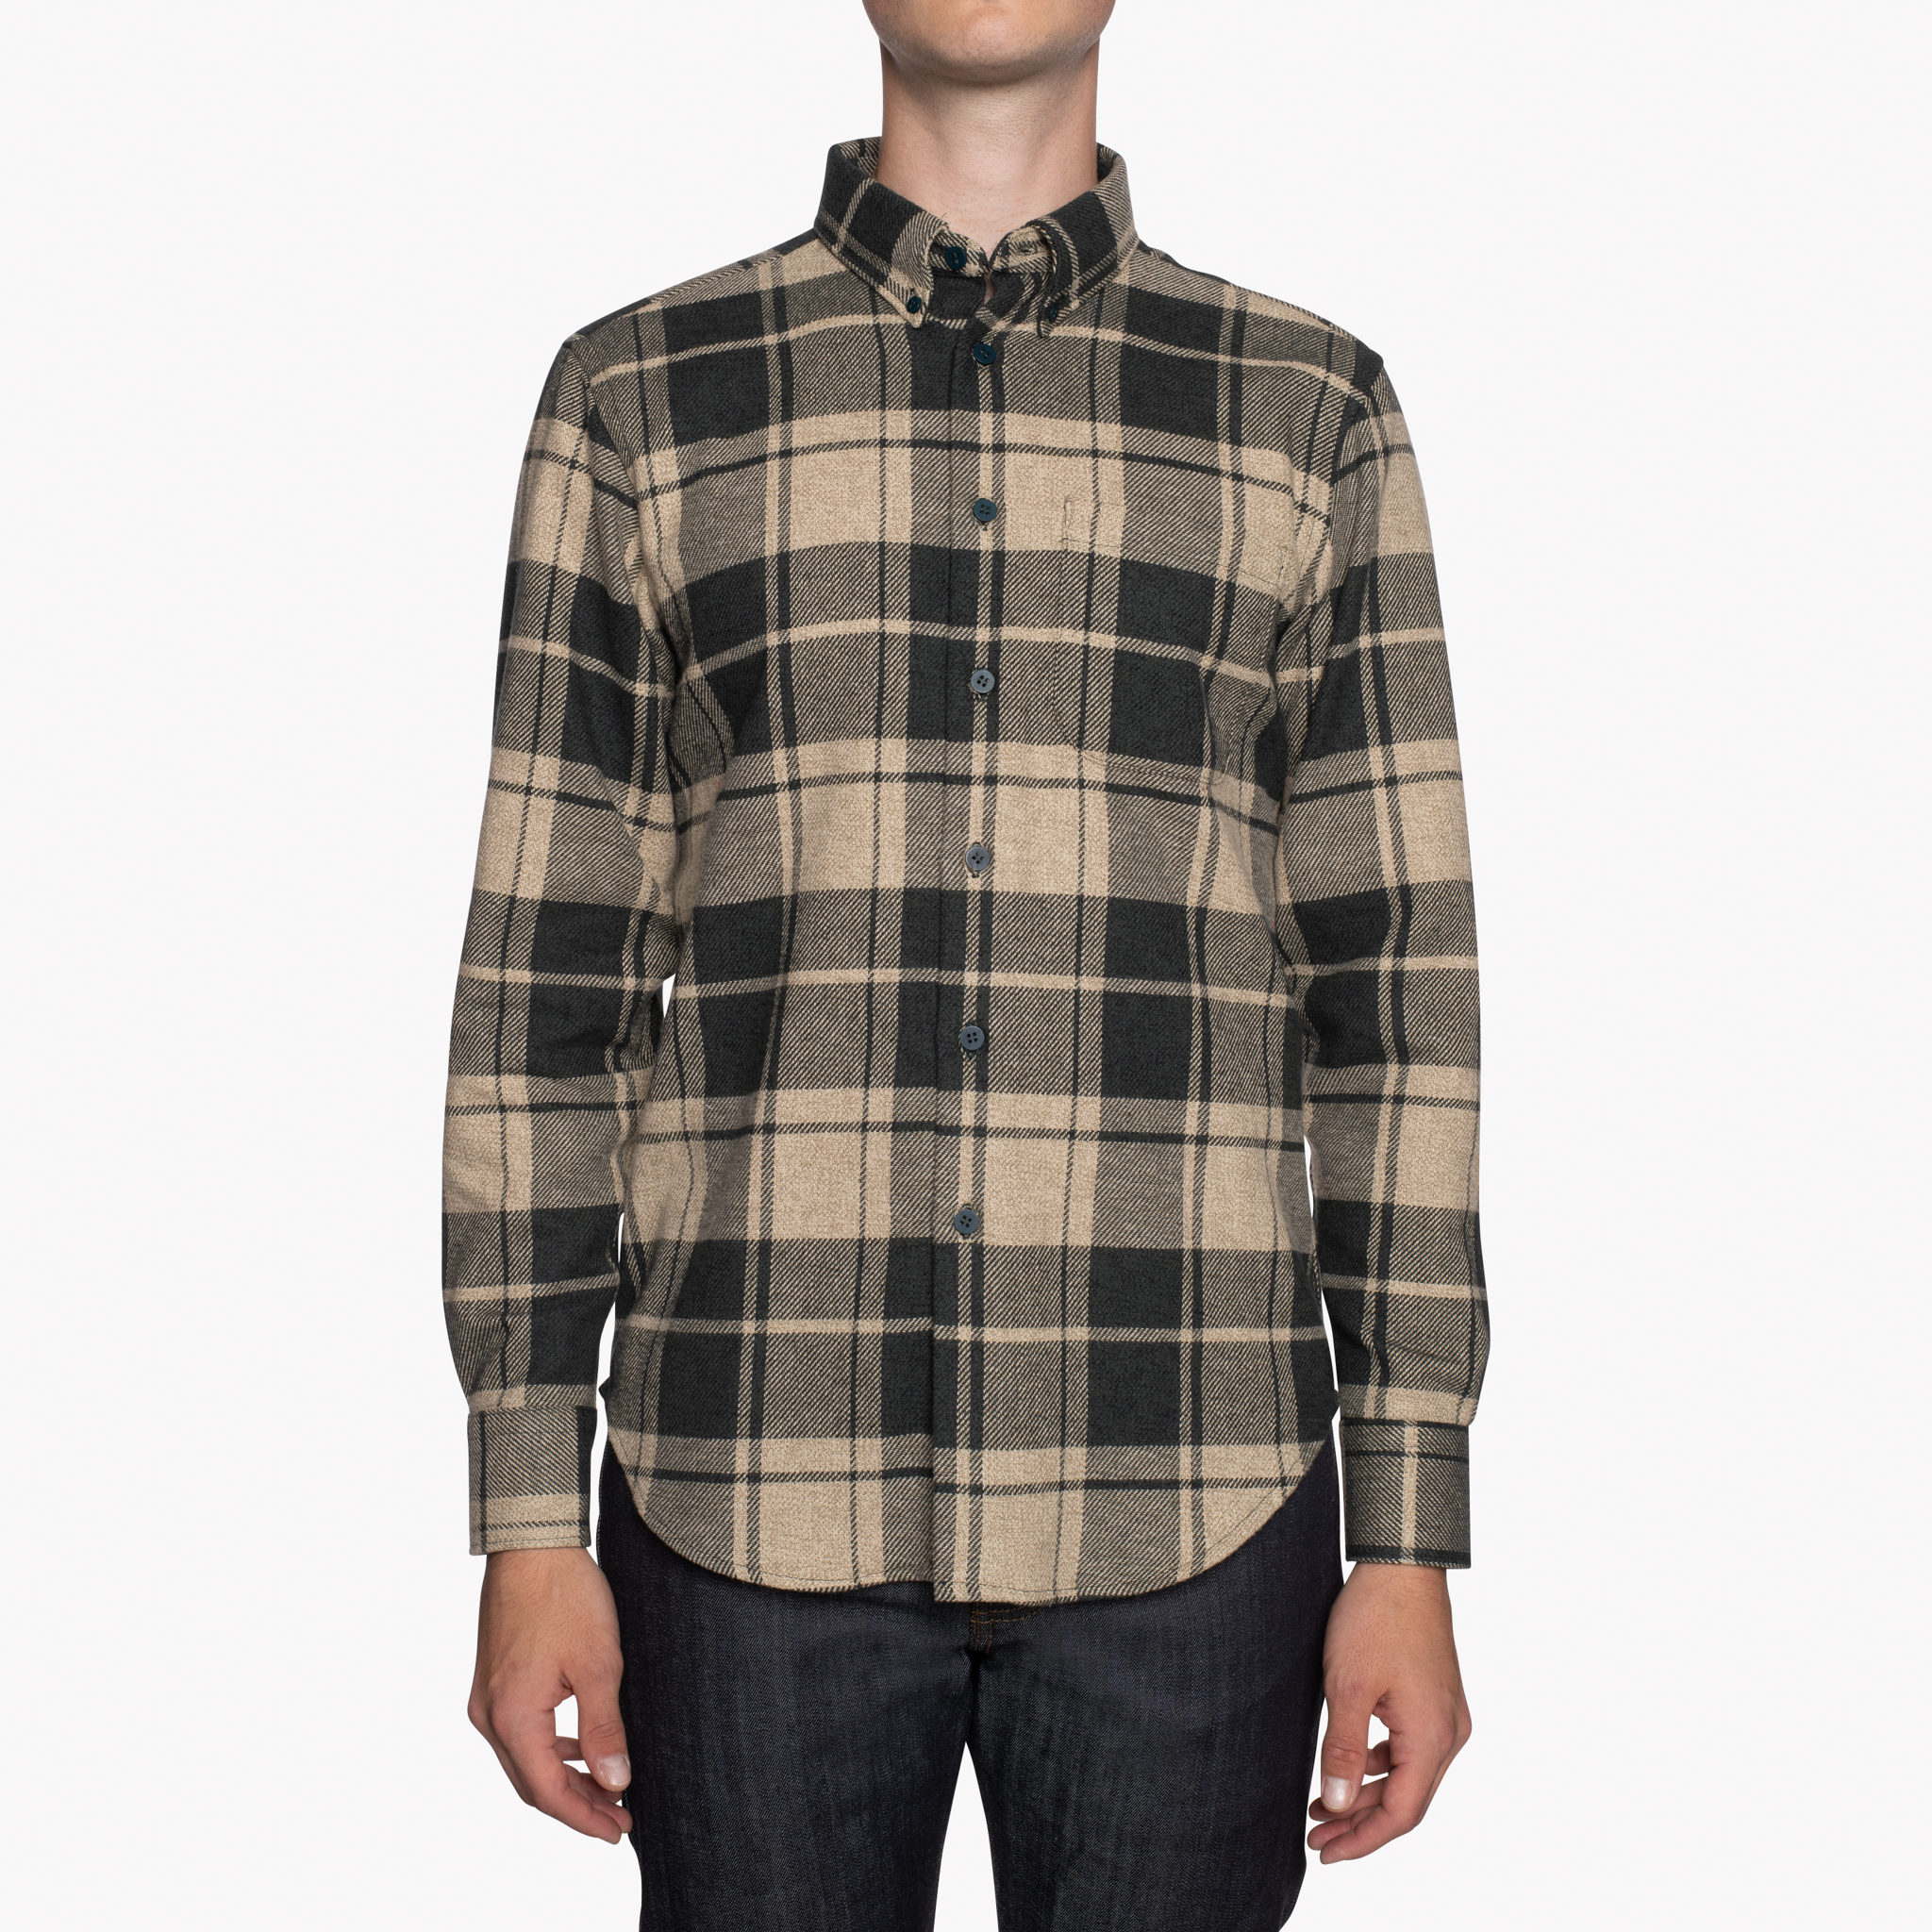  Easy Shirt - Heavy Vintage Flannel - Forest/Grey - front 